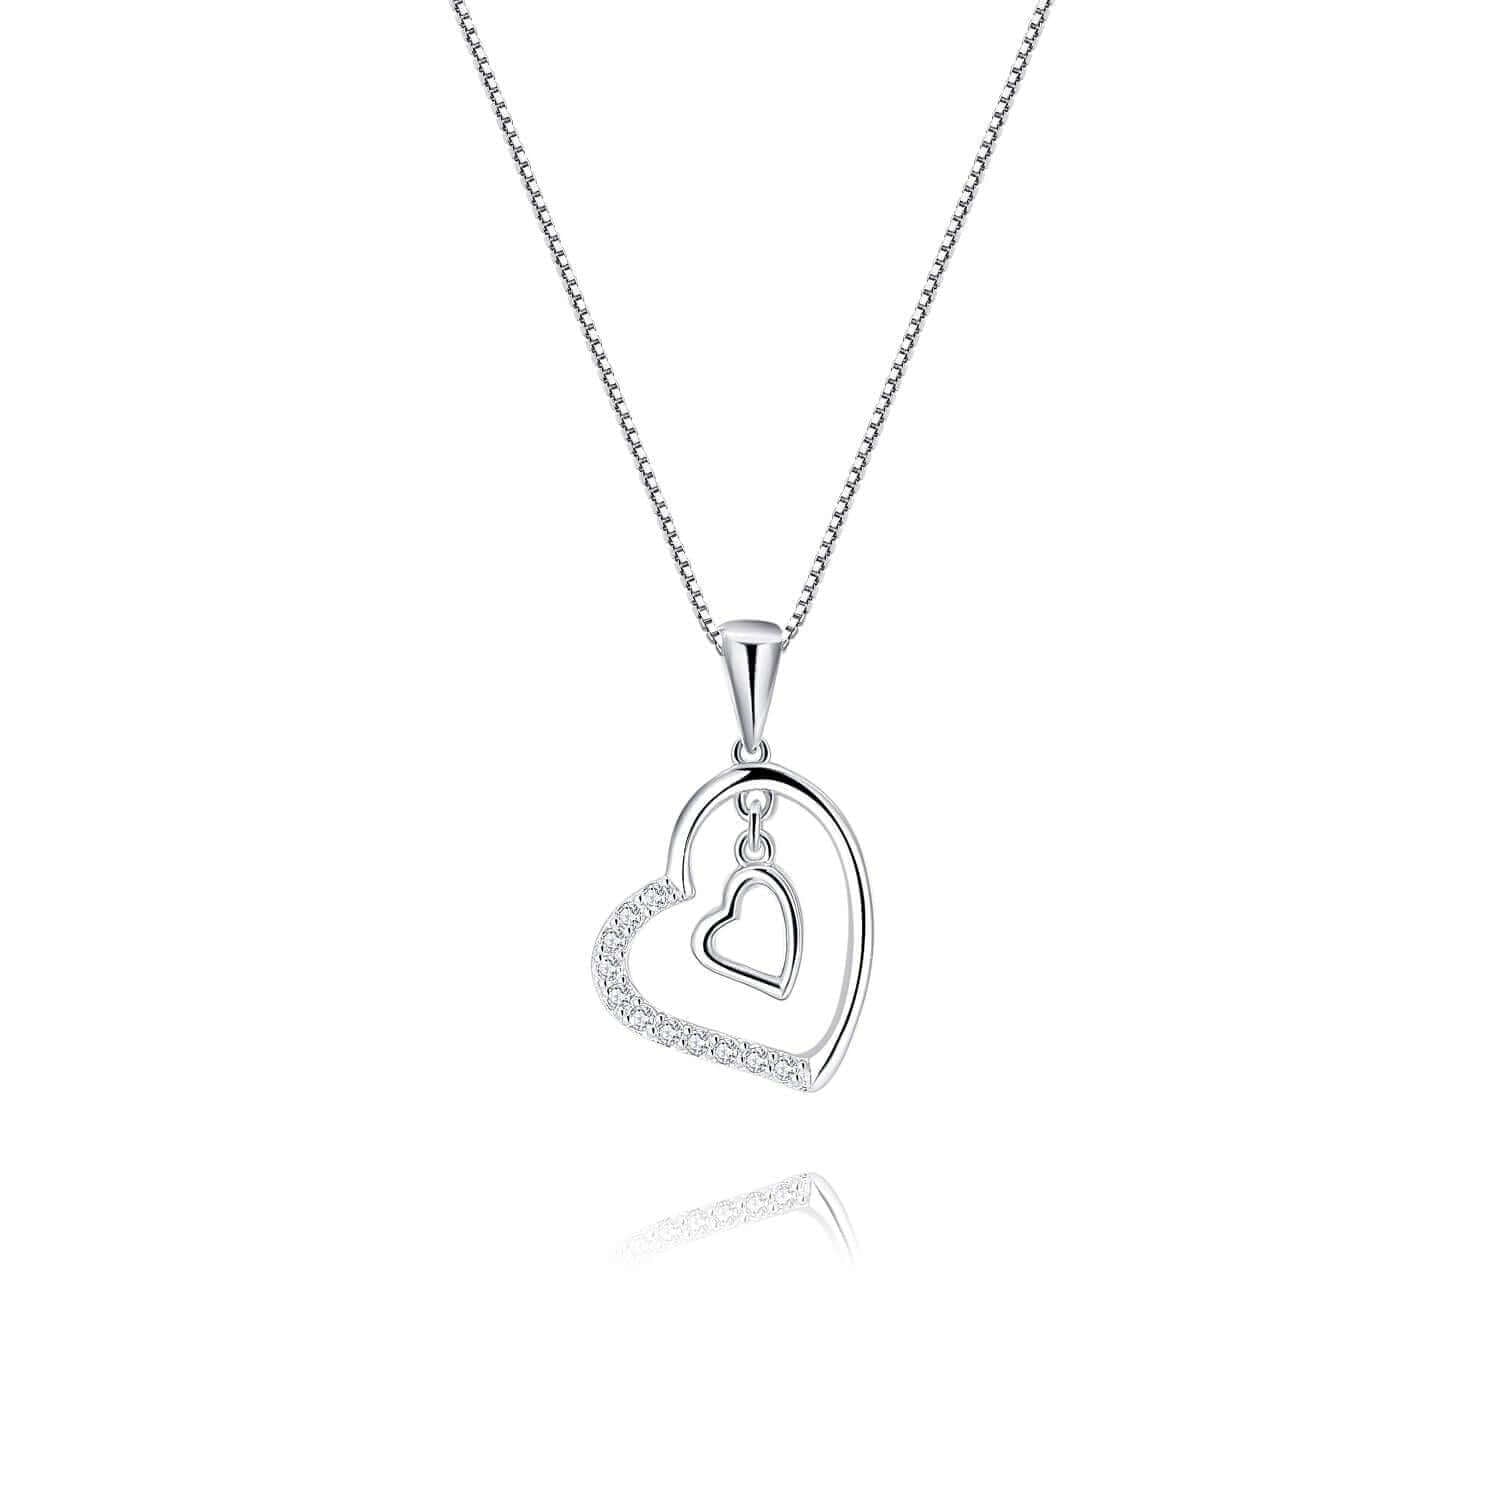 Luxury 18k Gold Love Heart Pendant Necklace Wedding Engagement Jewelry  Gifts 